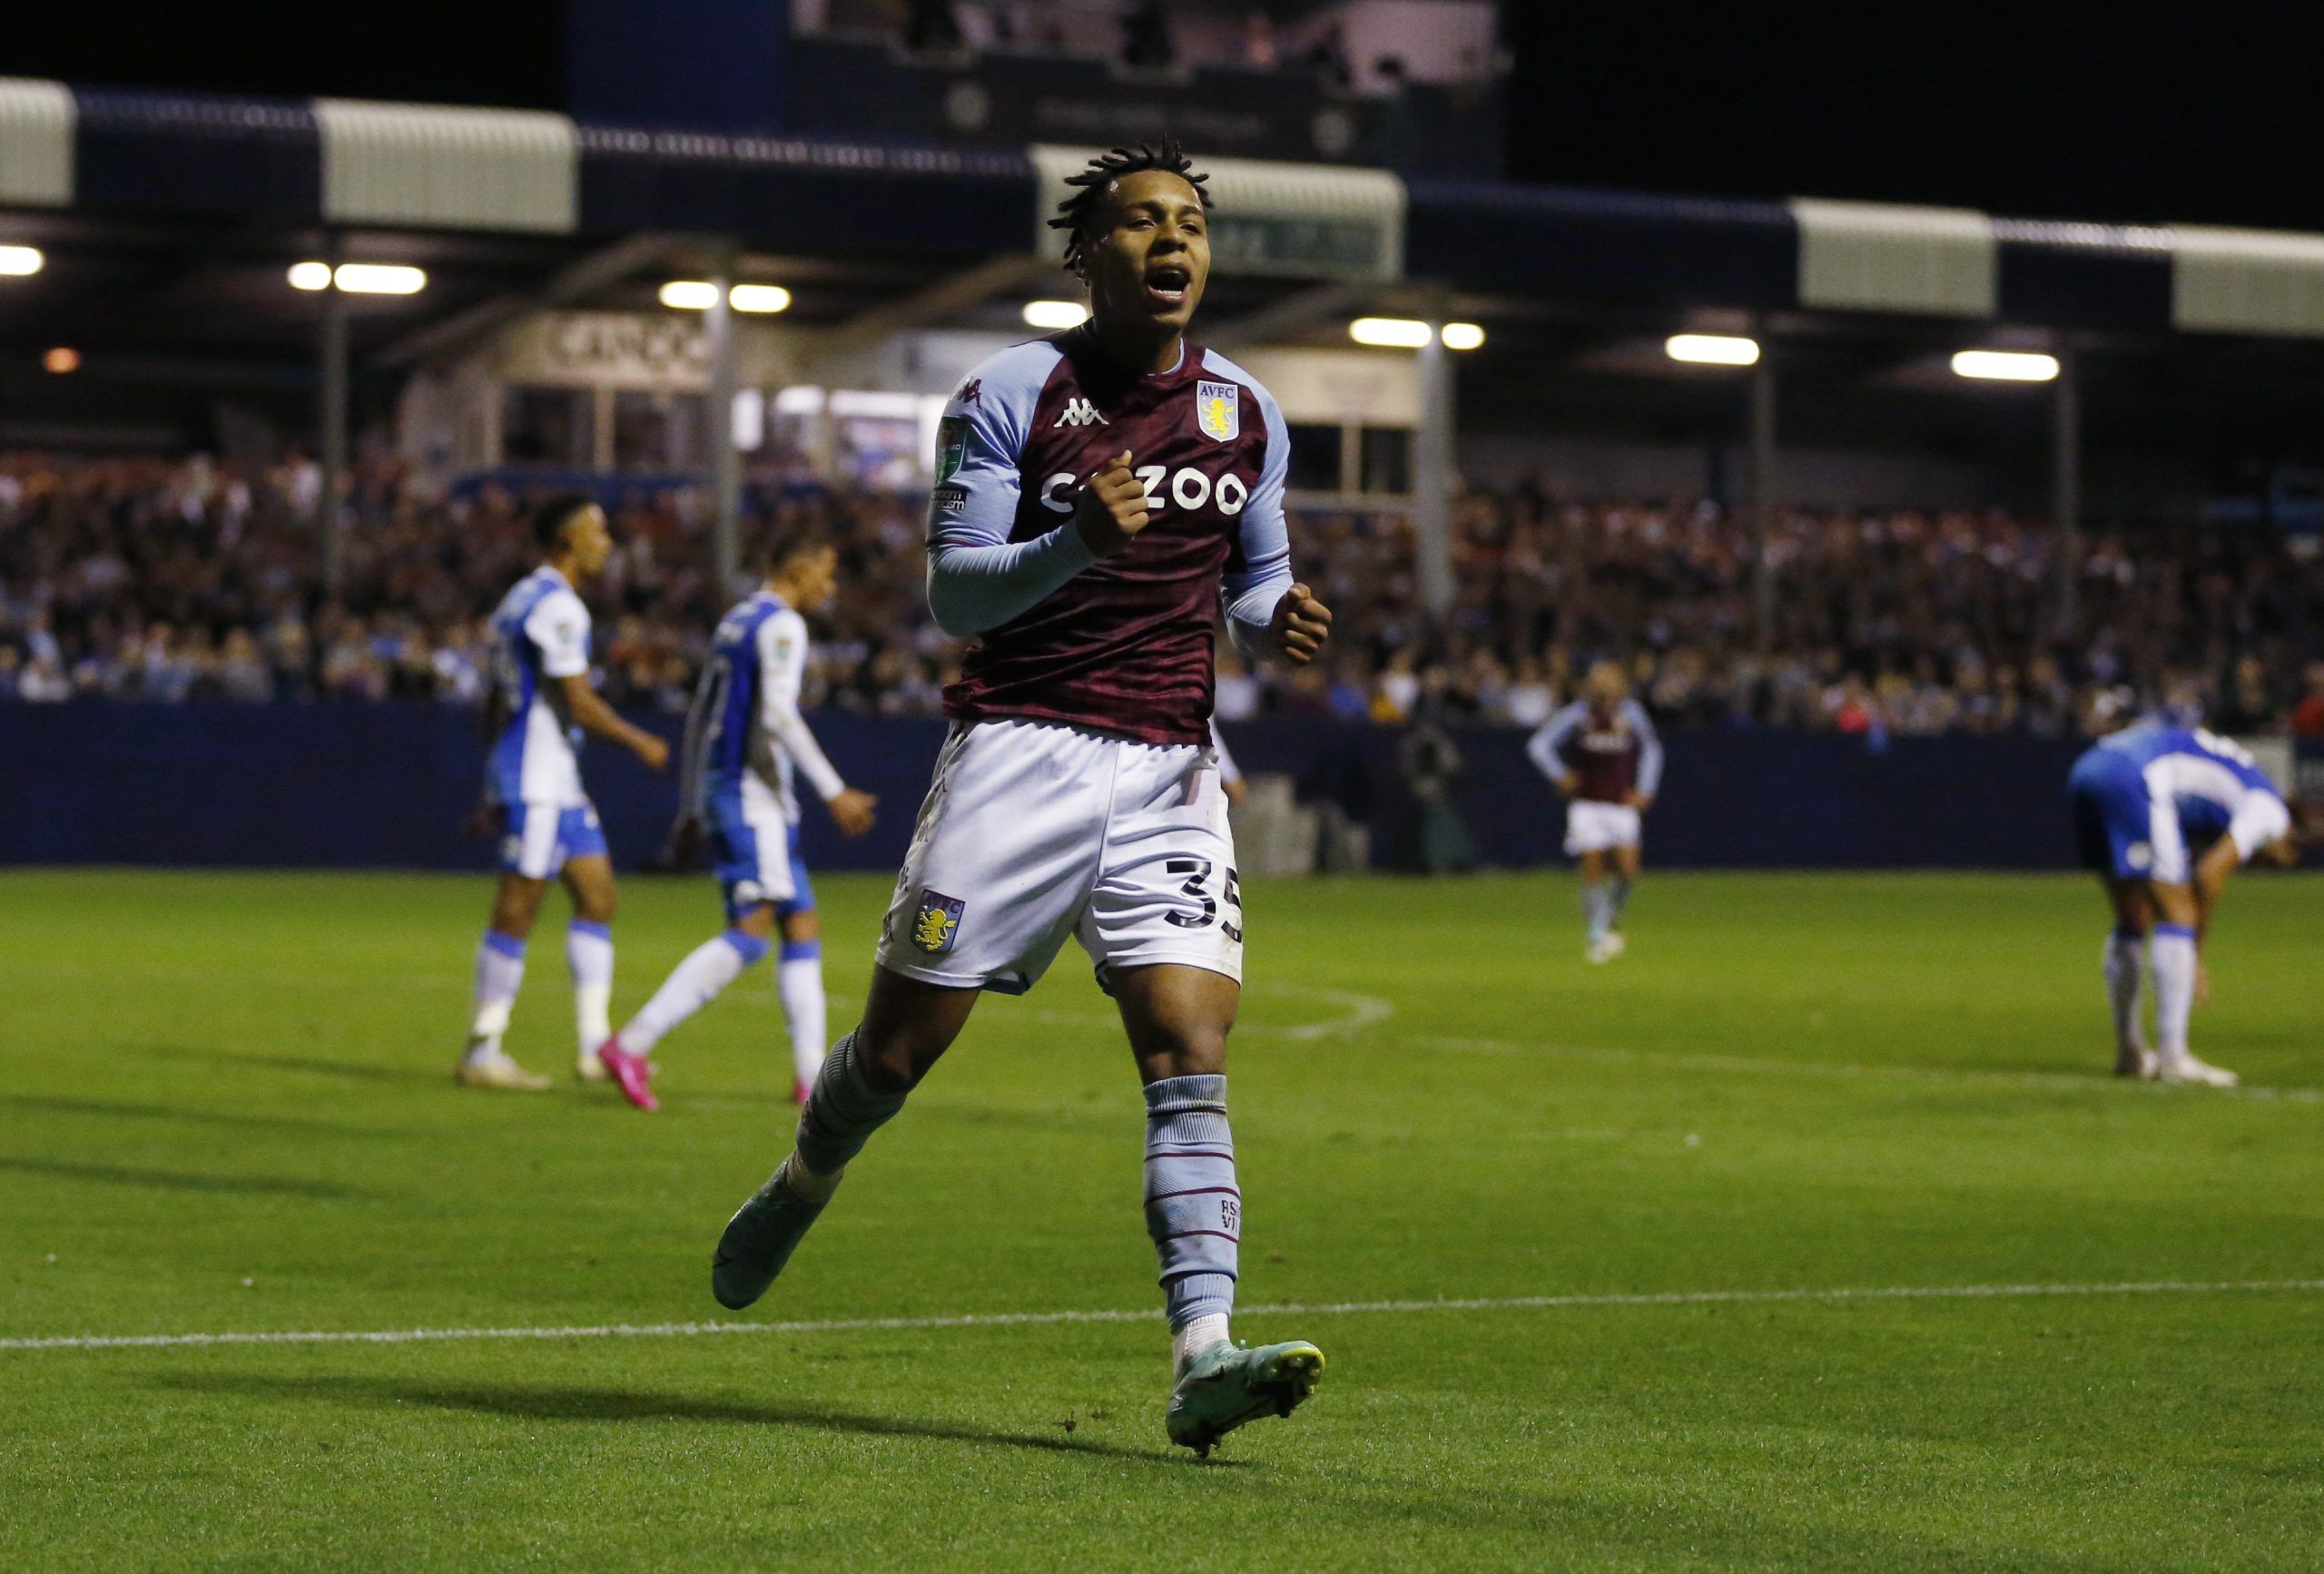 Soccer - England - Carabao Cup Second Round - Barrow v Aston Villa - Holker Street, Barrow-in-Furness, Britain - August 24, 2021 Aston Villa's Cameron Archer celebrates scoring their sixth goal and his hat-trick Action Images via Reuters/Ed Sykes